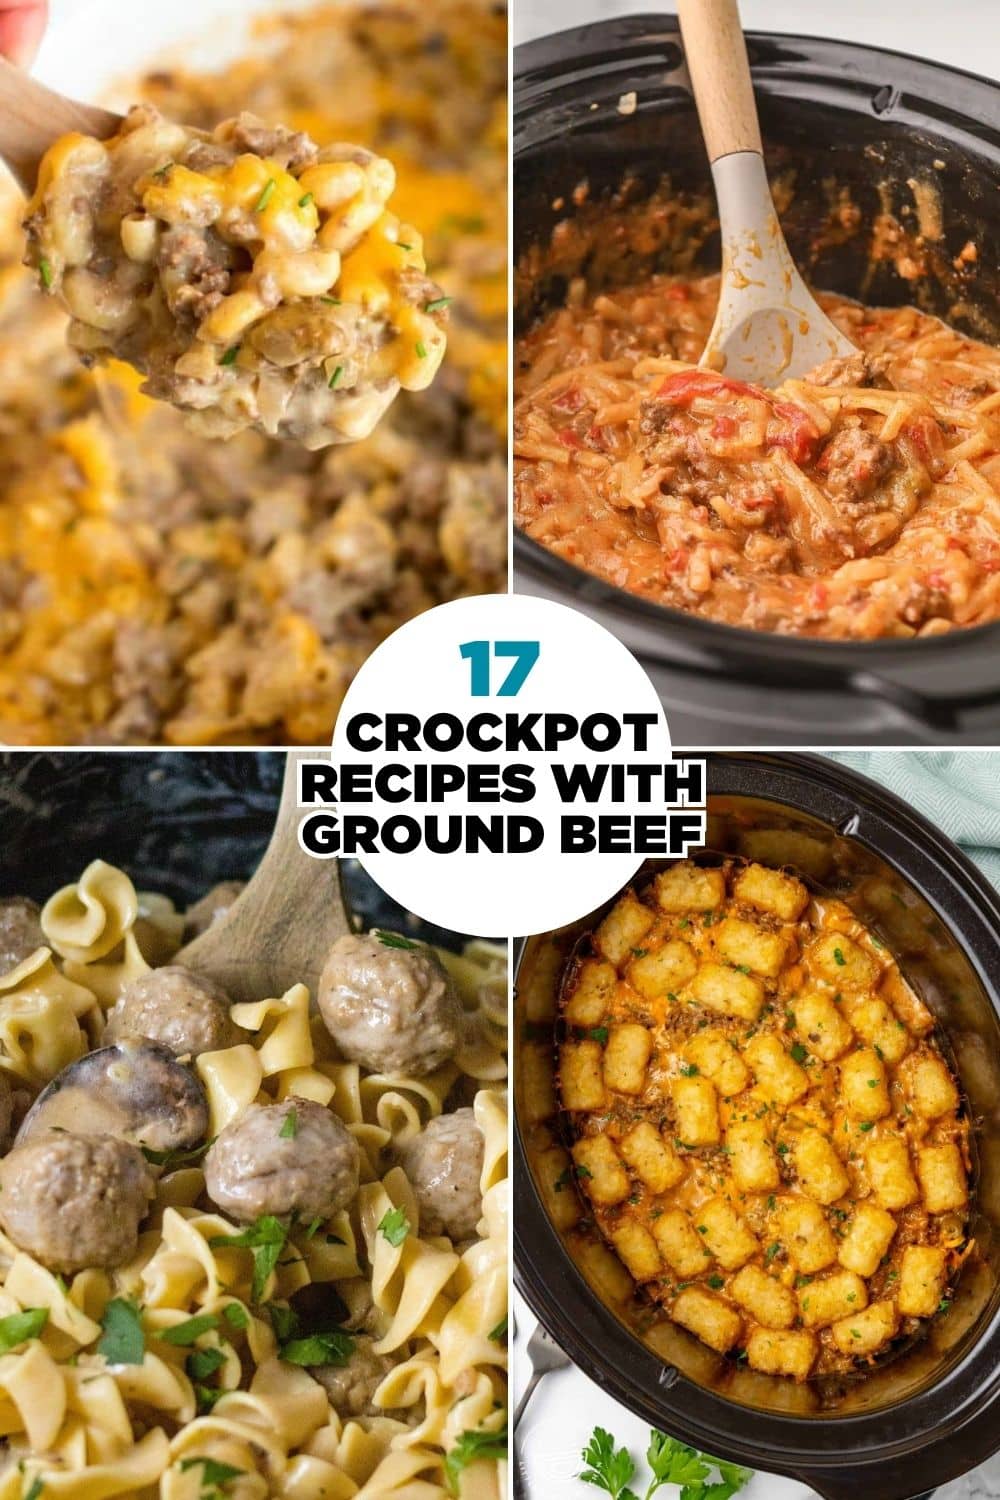 This selection of Delicious Crockpot Recipes Using Ground Beef offers a wonderful array of mouthwatering dishes that are hearty and easy-to-prepare comfort foods. From cheesy pasta dishes and savory beefy potato favorites and more, these casserole recipes are sure to be a huge hit with the whole family.